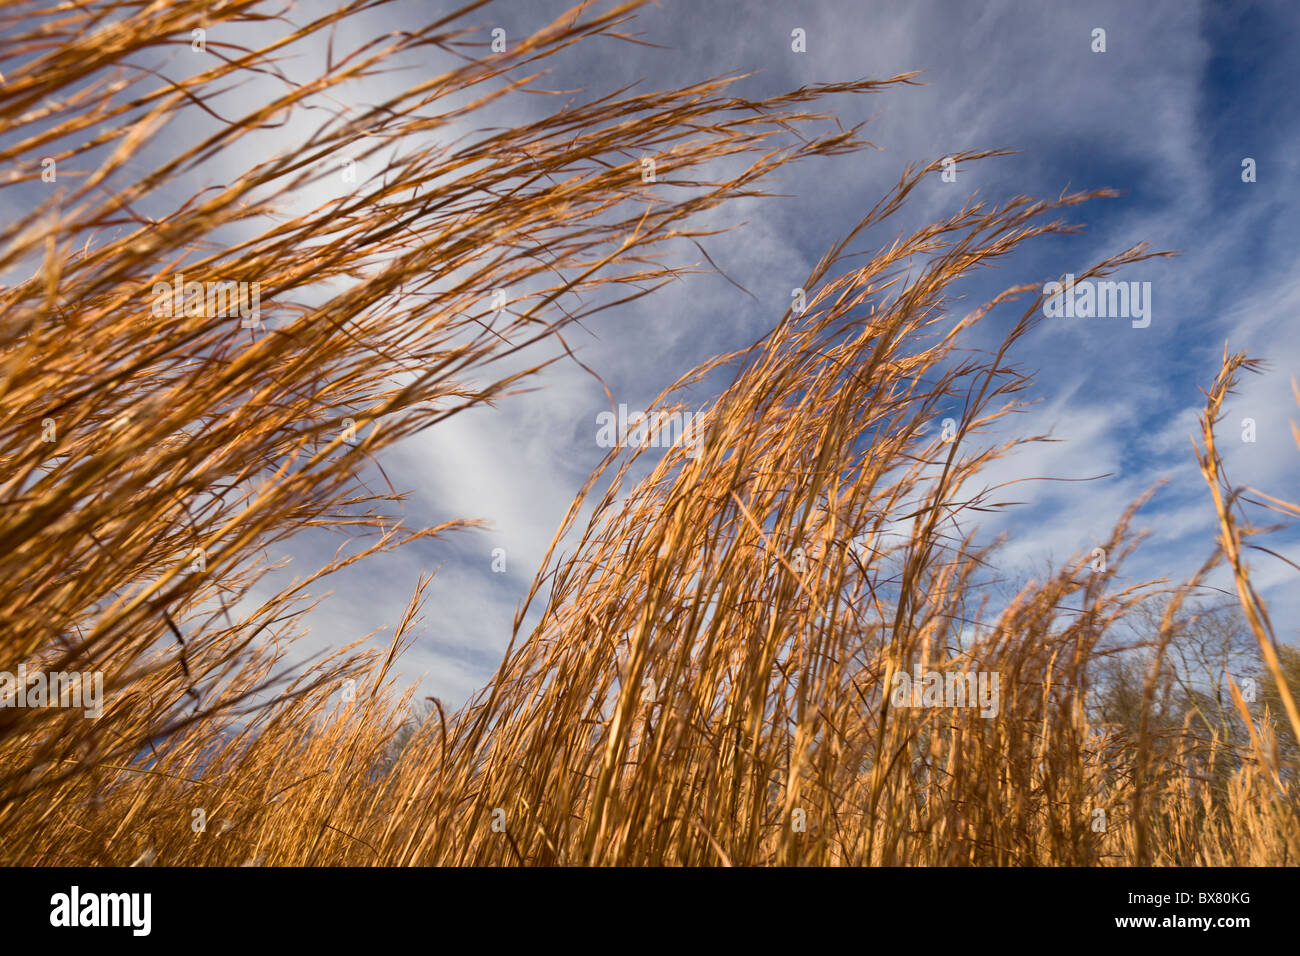 Wheatgrass against cloudy blue sky at Spiro Mounds Archeological Site in Oklahoma, USA. Stock Photo